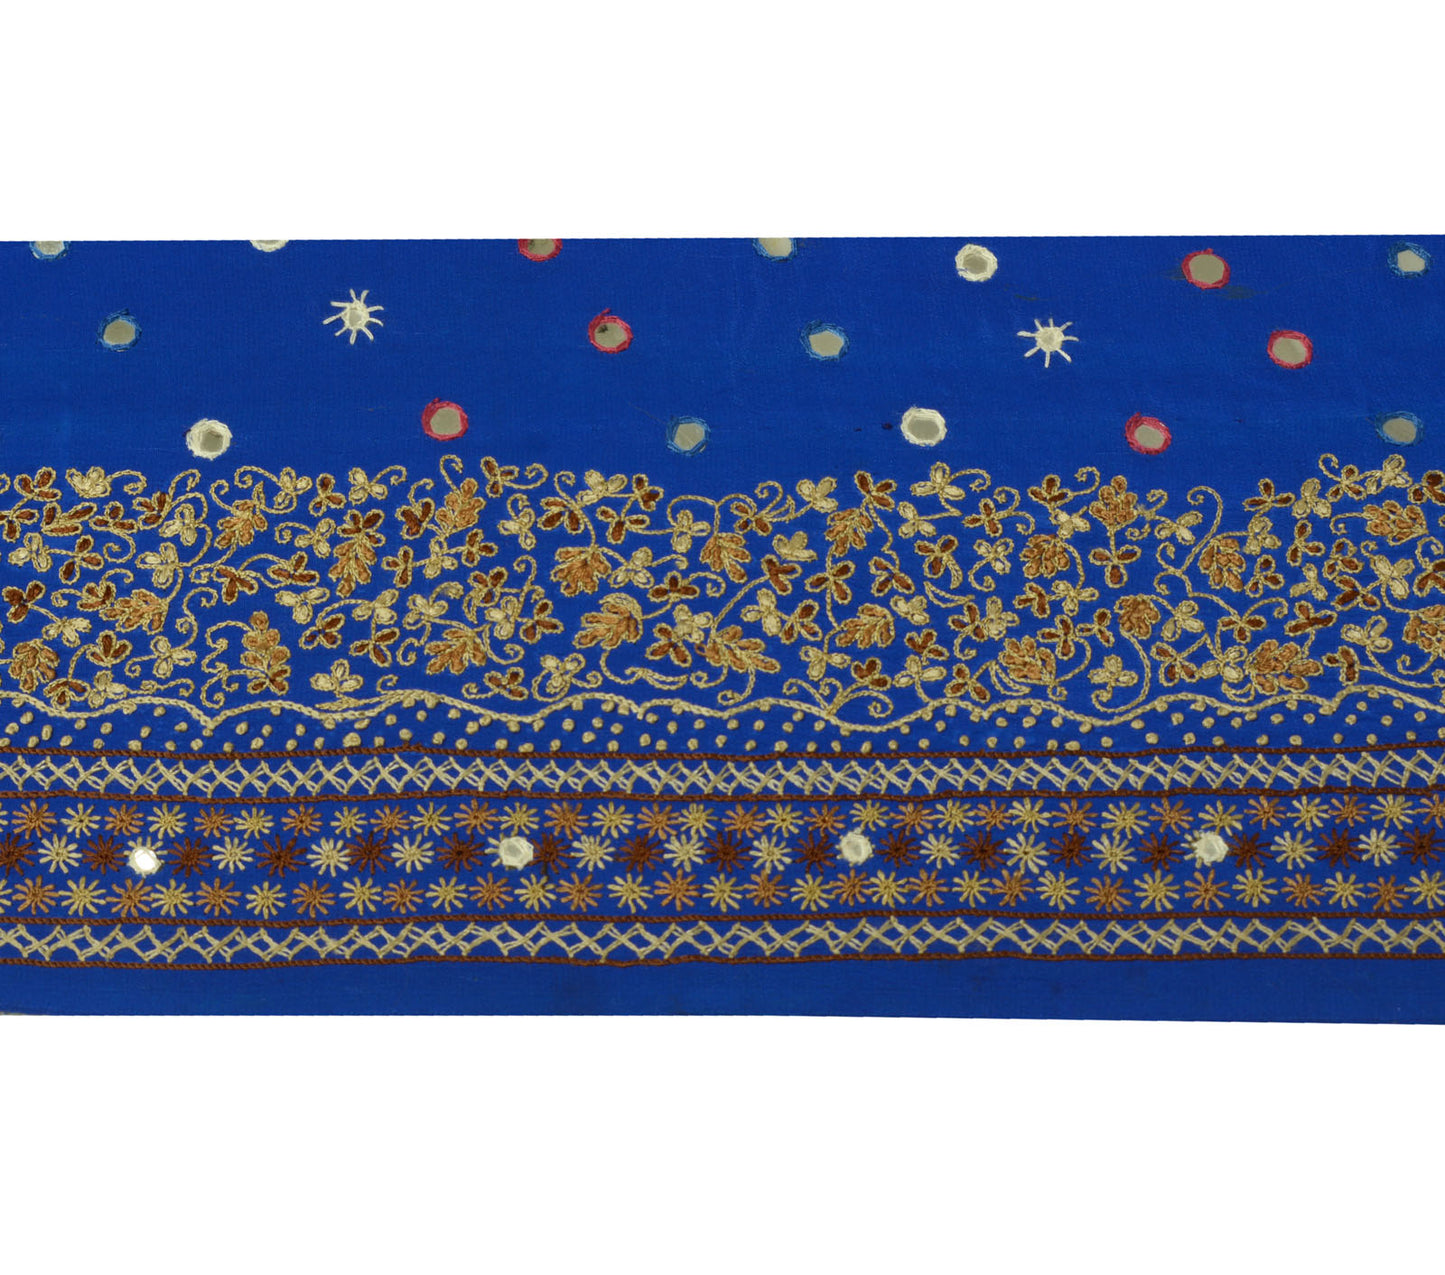 Sushila Vintage Blue Sari Border Indian Craft Sewing Trim Hand Embroidered Lace